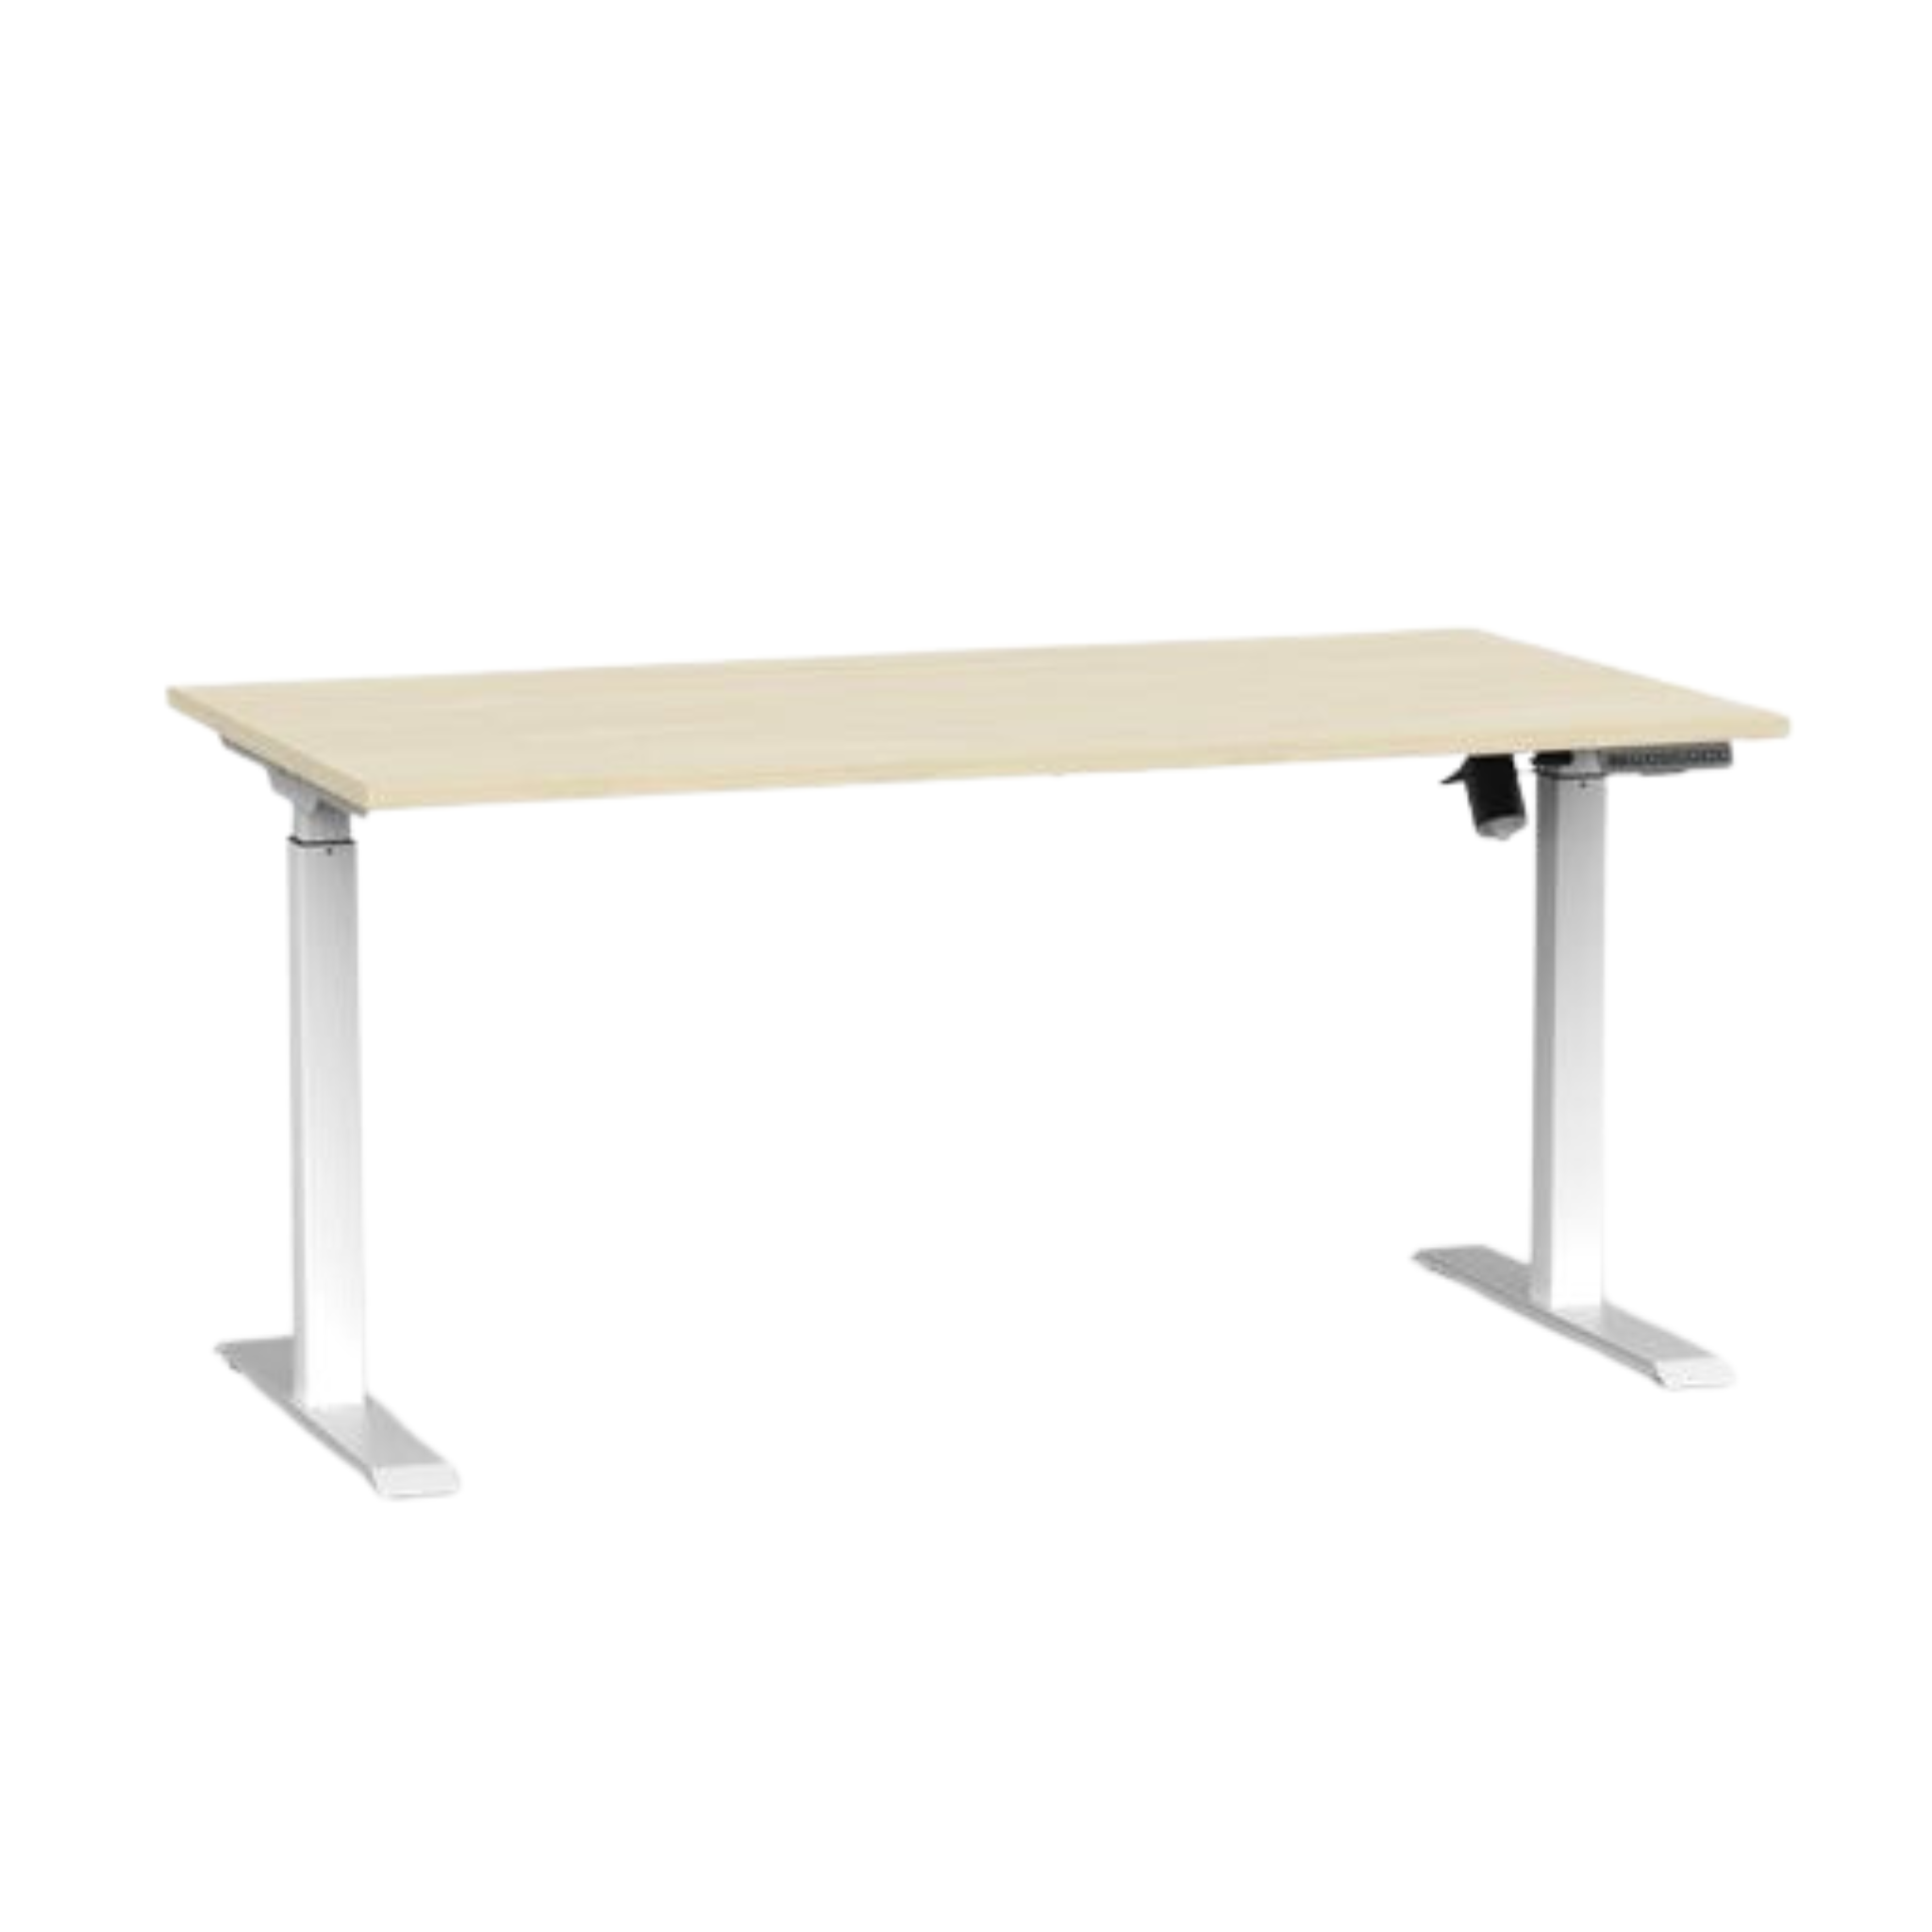 Agile boost electric sit to stand desk with white frame and nordic maple top